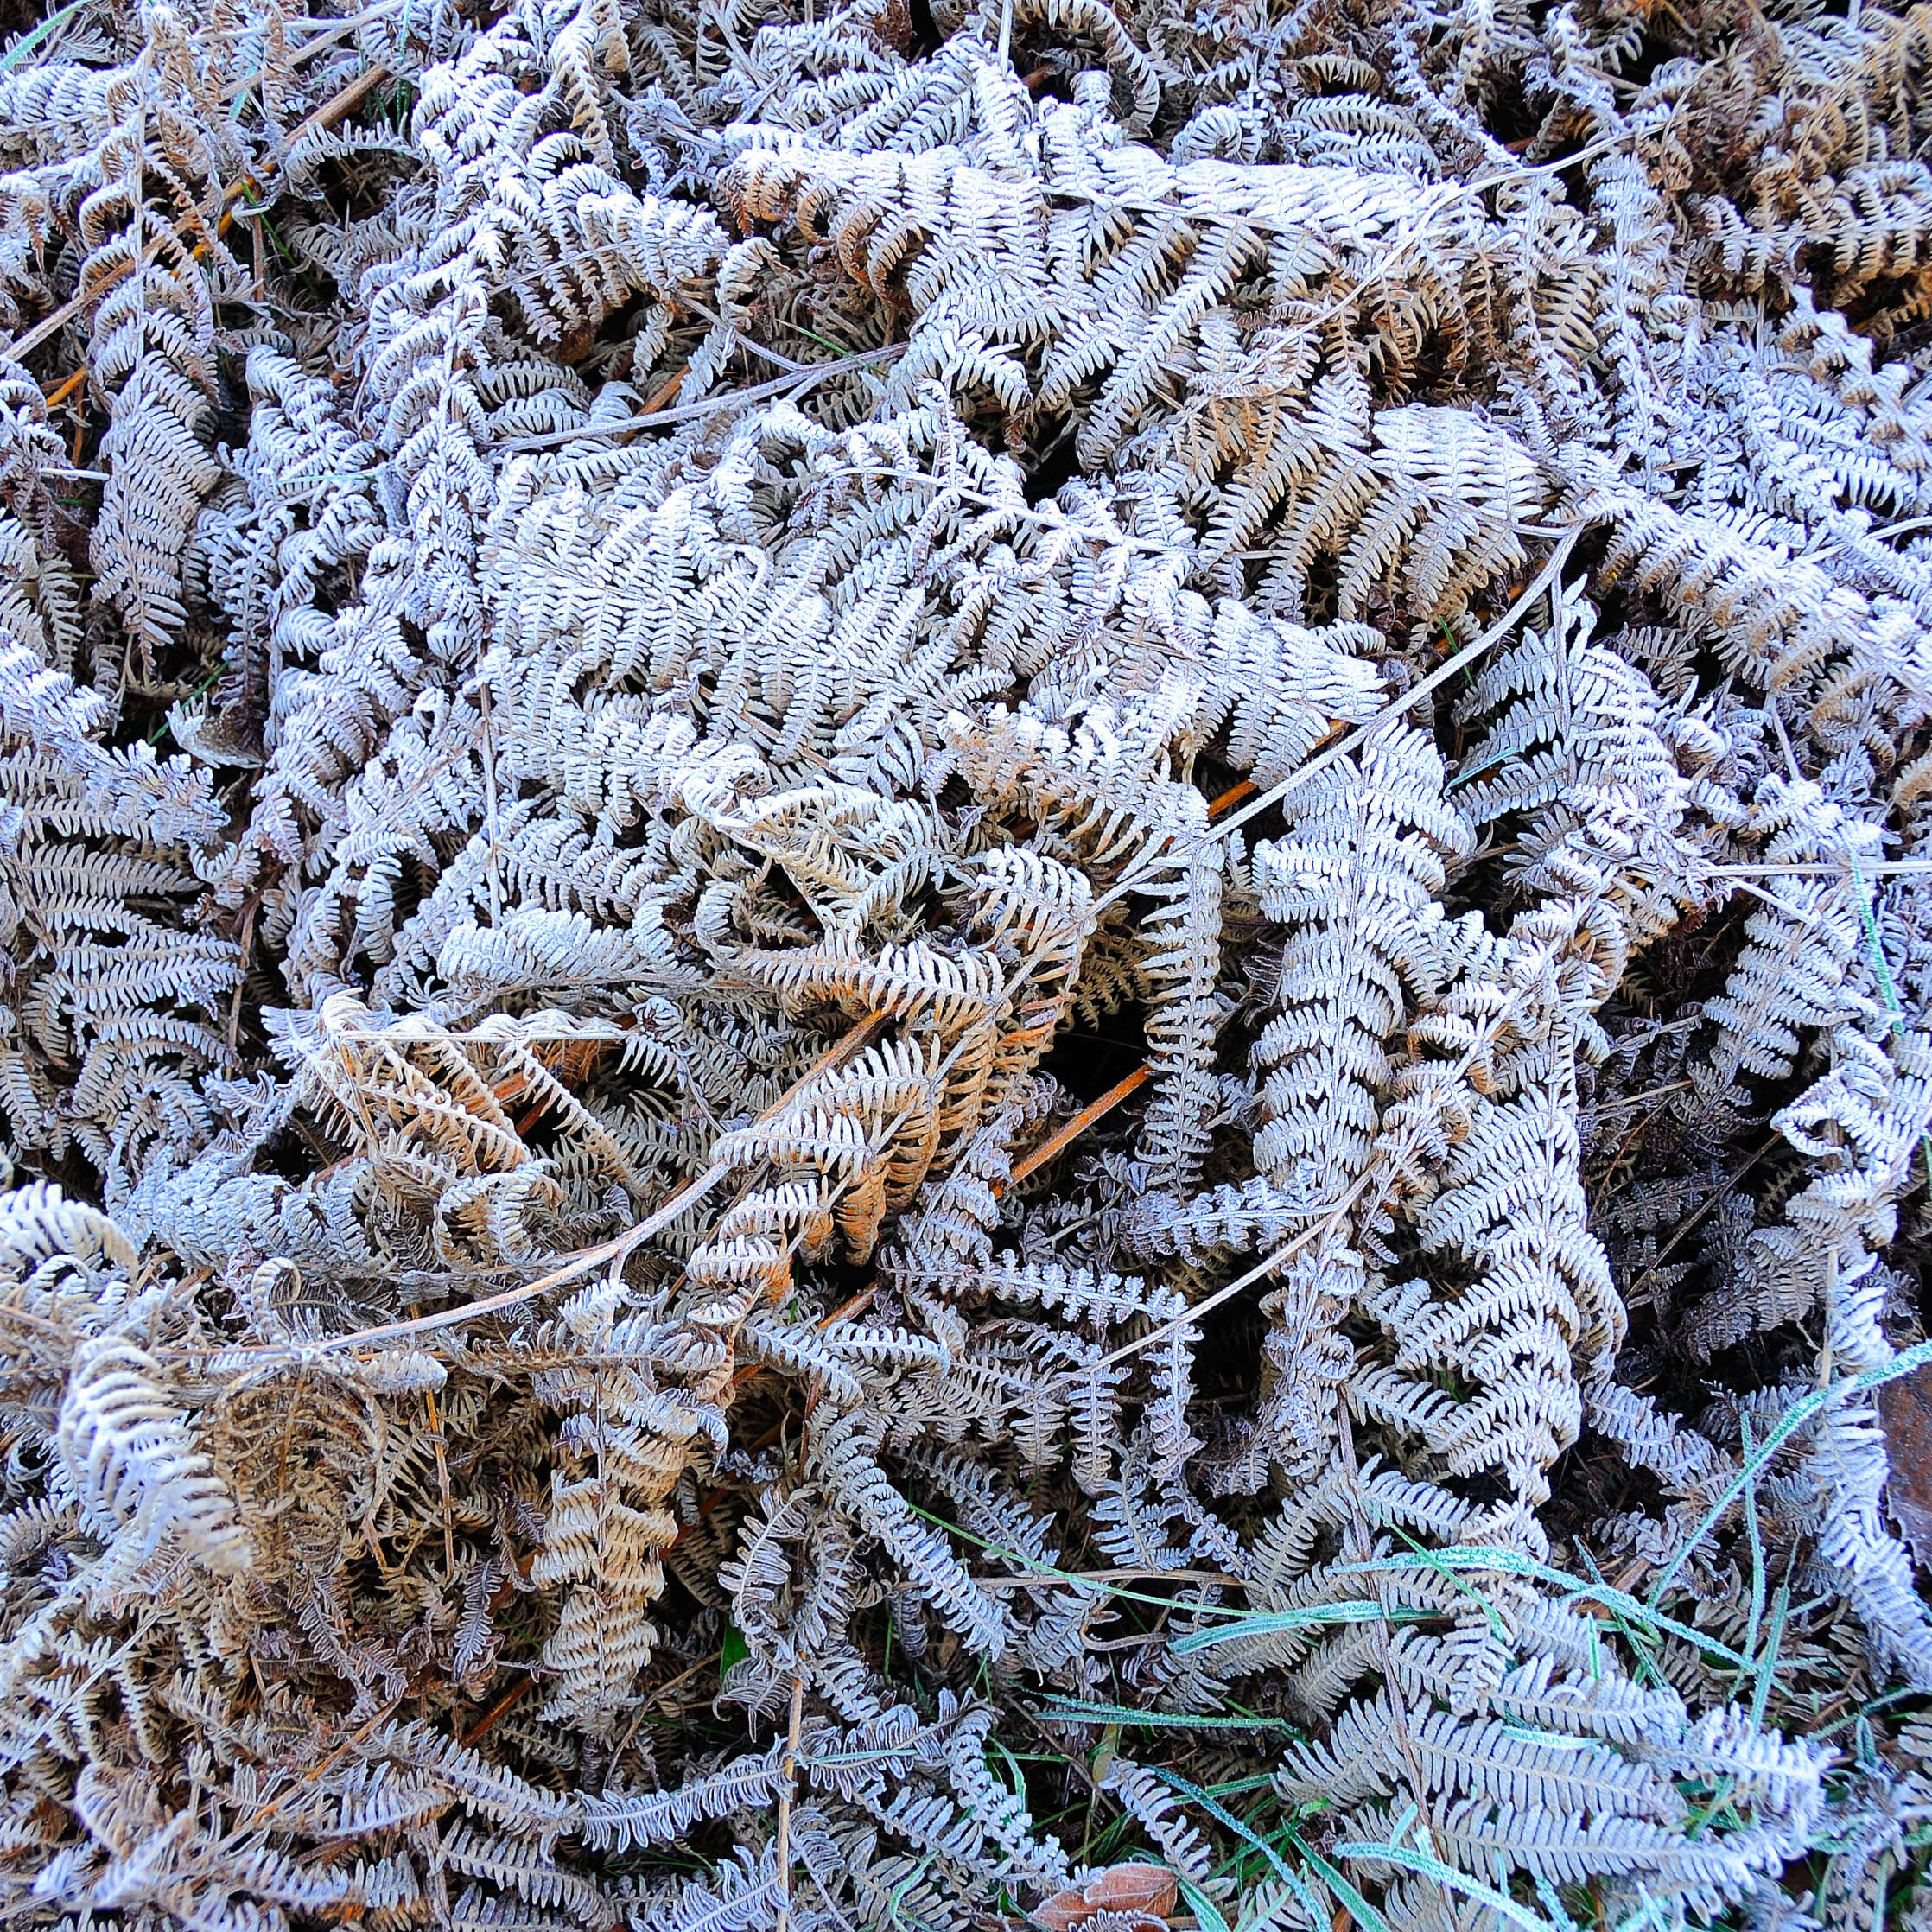 Ferns caught in morning frost